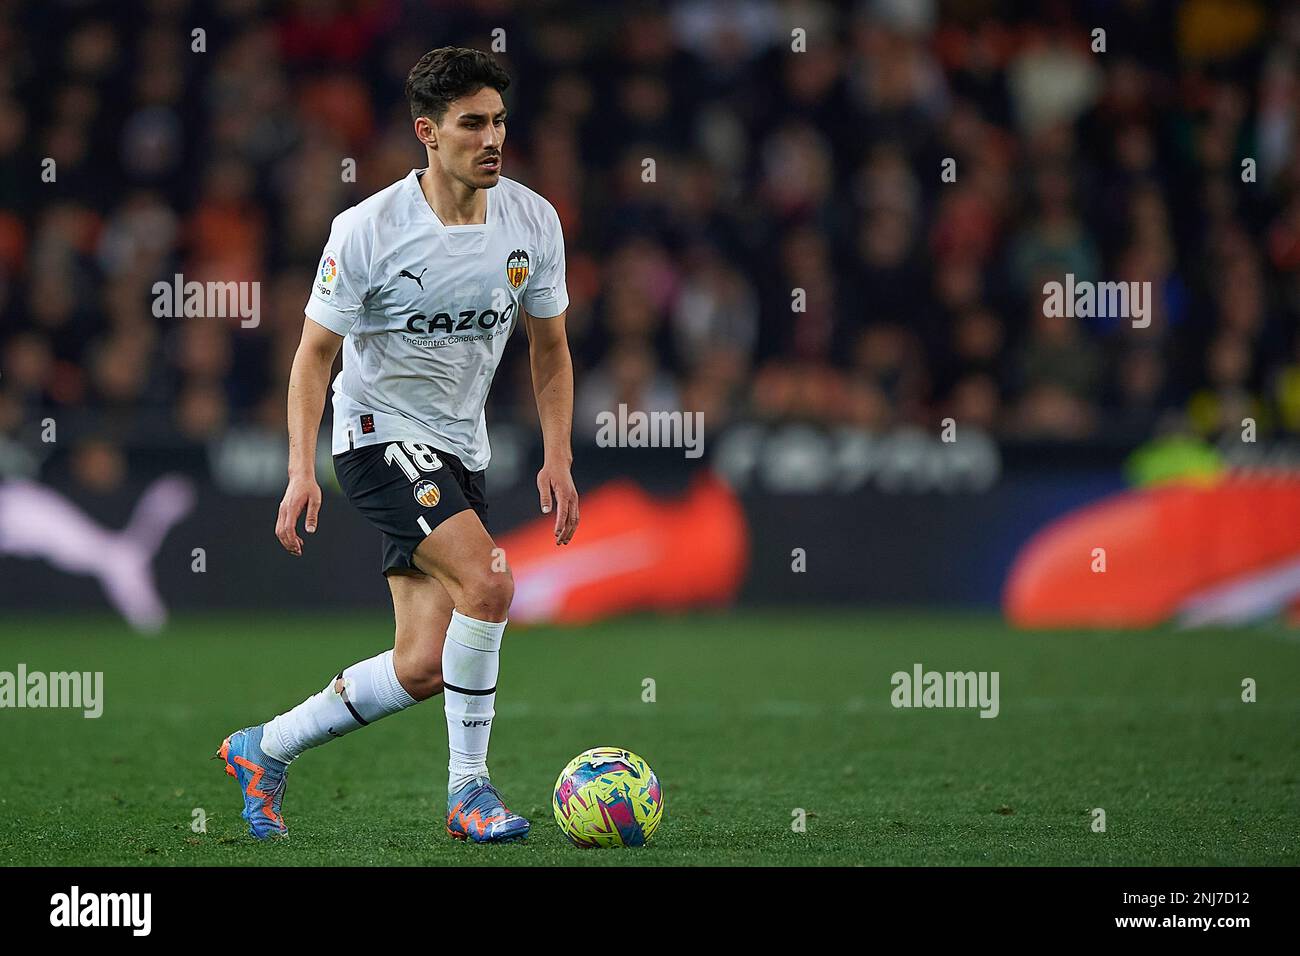 Andre Almeida of Valencia CF during the La Liga match between Valencia and Athletic Club played at Mestalla Stadium on February 11 in Valencia, Spain. (Photo by PRESSIN) Stock Photo